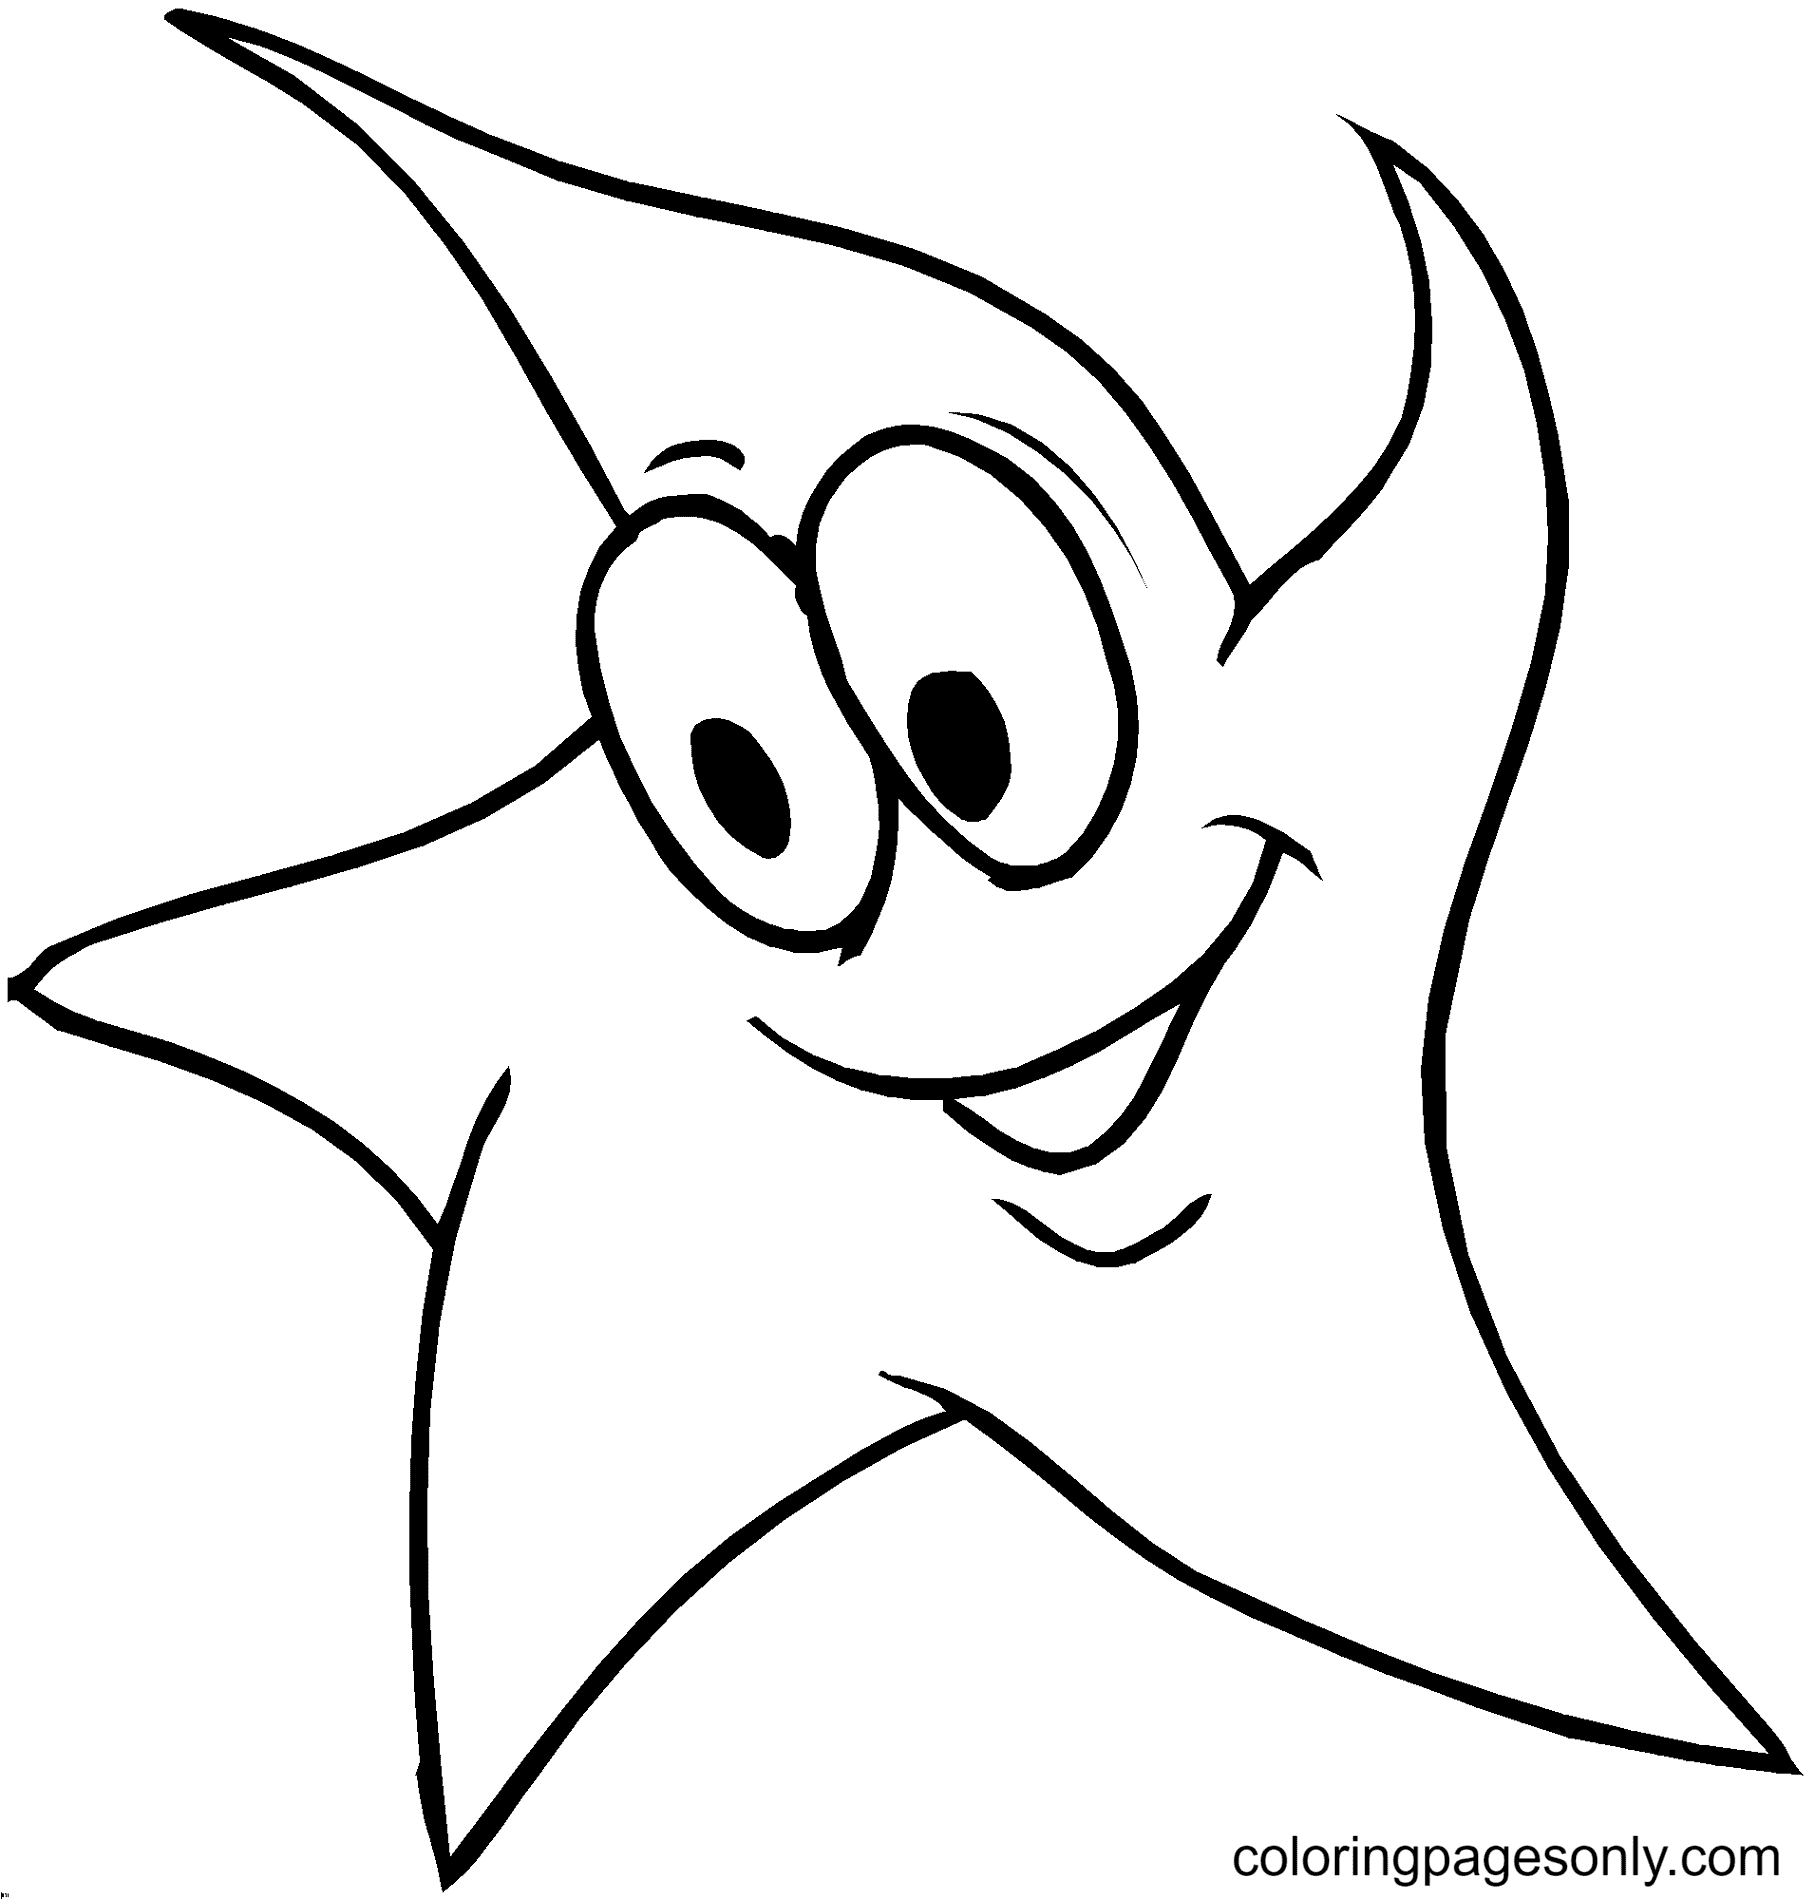 Dancing Star Coloring Pages